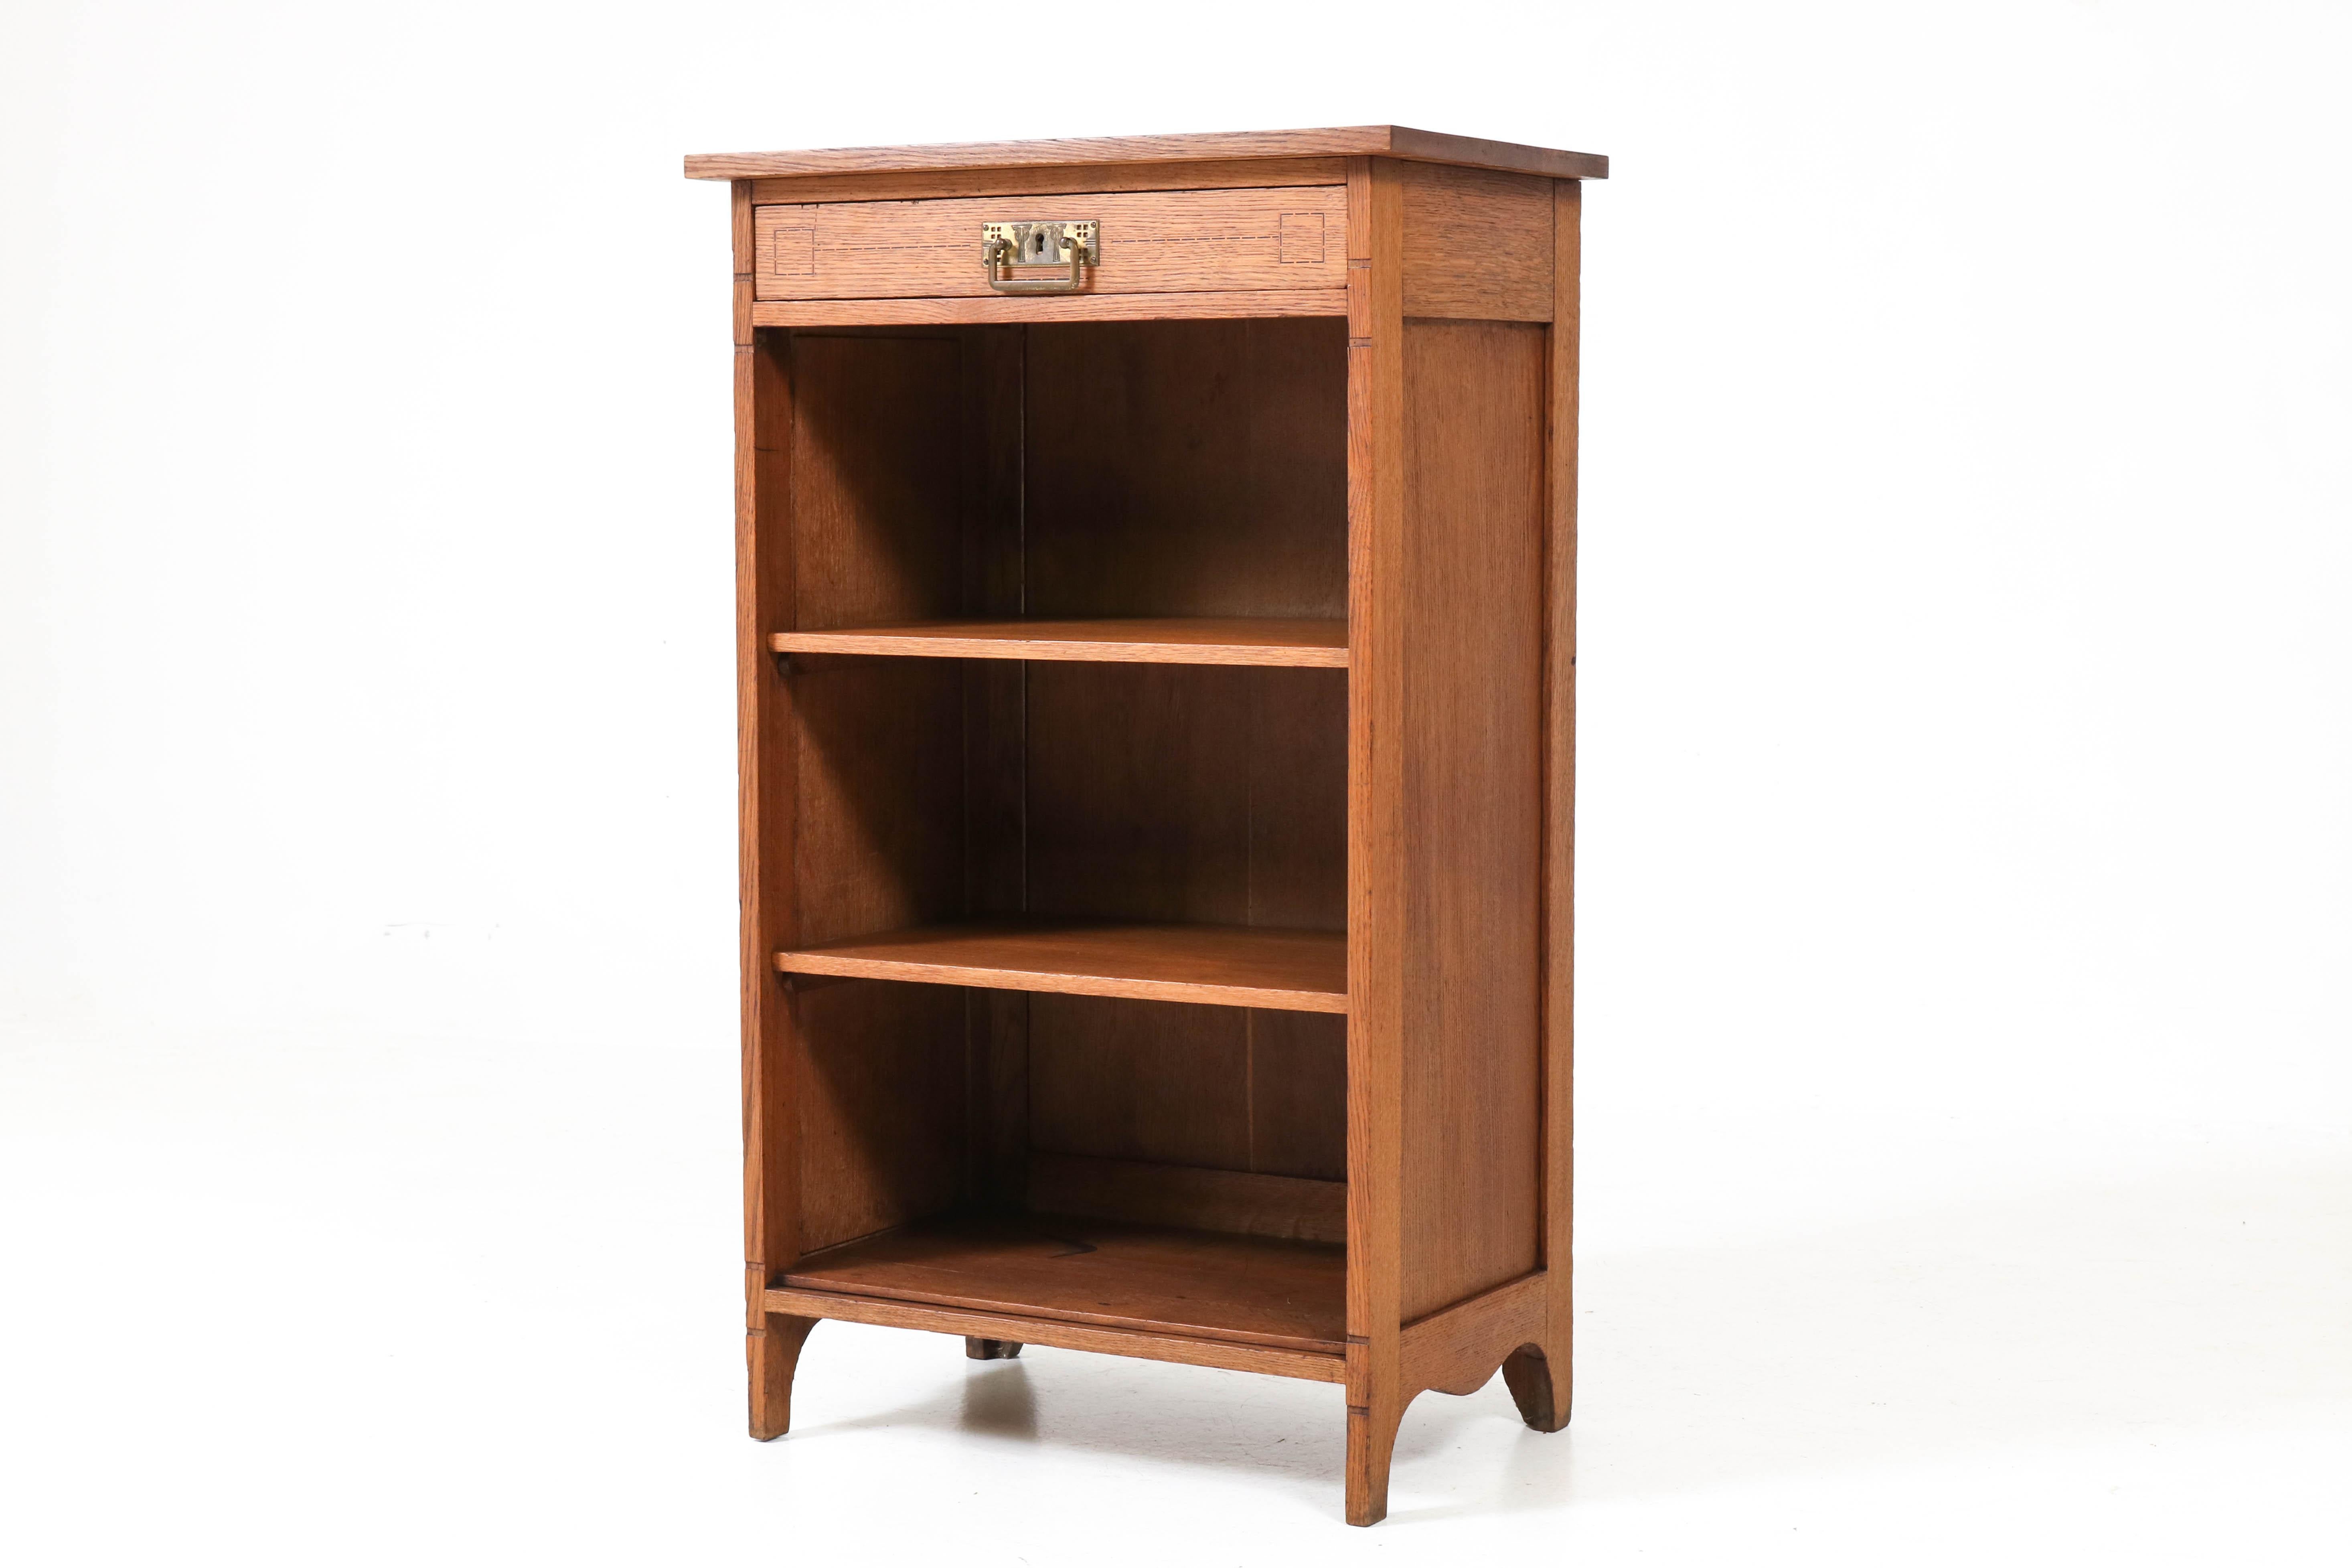 Elegant Dutch Art Nouveau Jugendstil open bookcase.
Solid oak with original solid brass handle on the drawer with inlay.
Two original solid shelves and solid oak bottom with some stains.
Not to be noticed when the bookcase is filled with